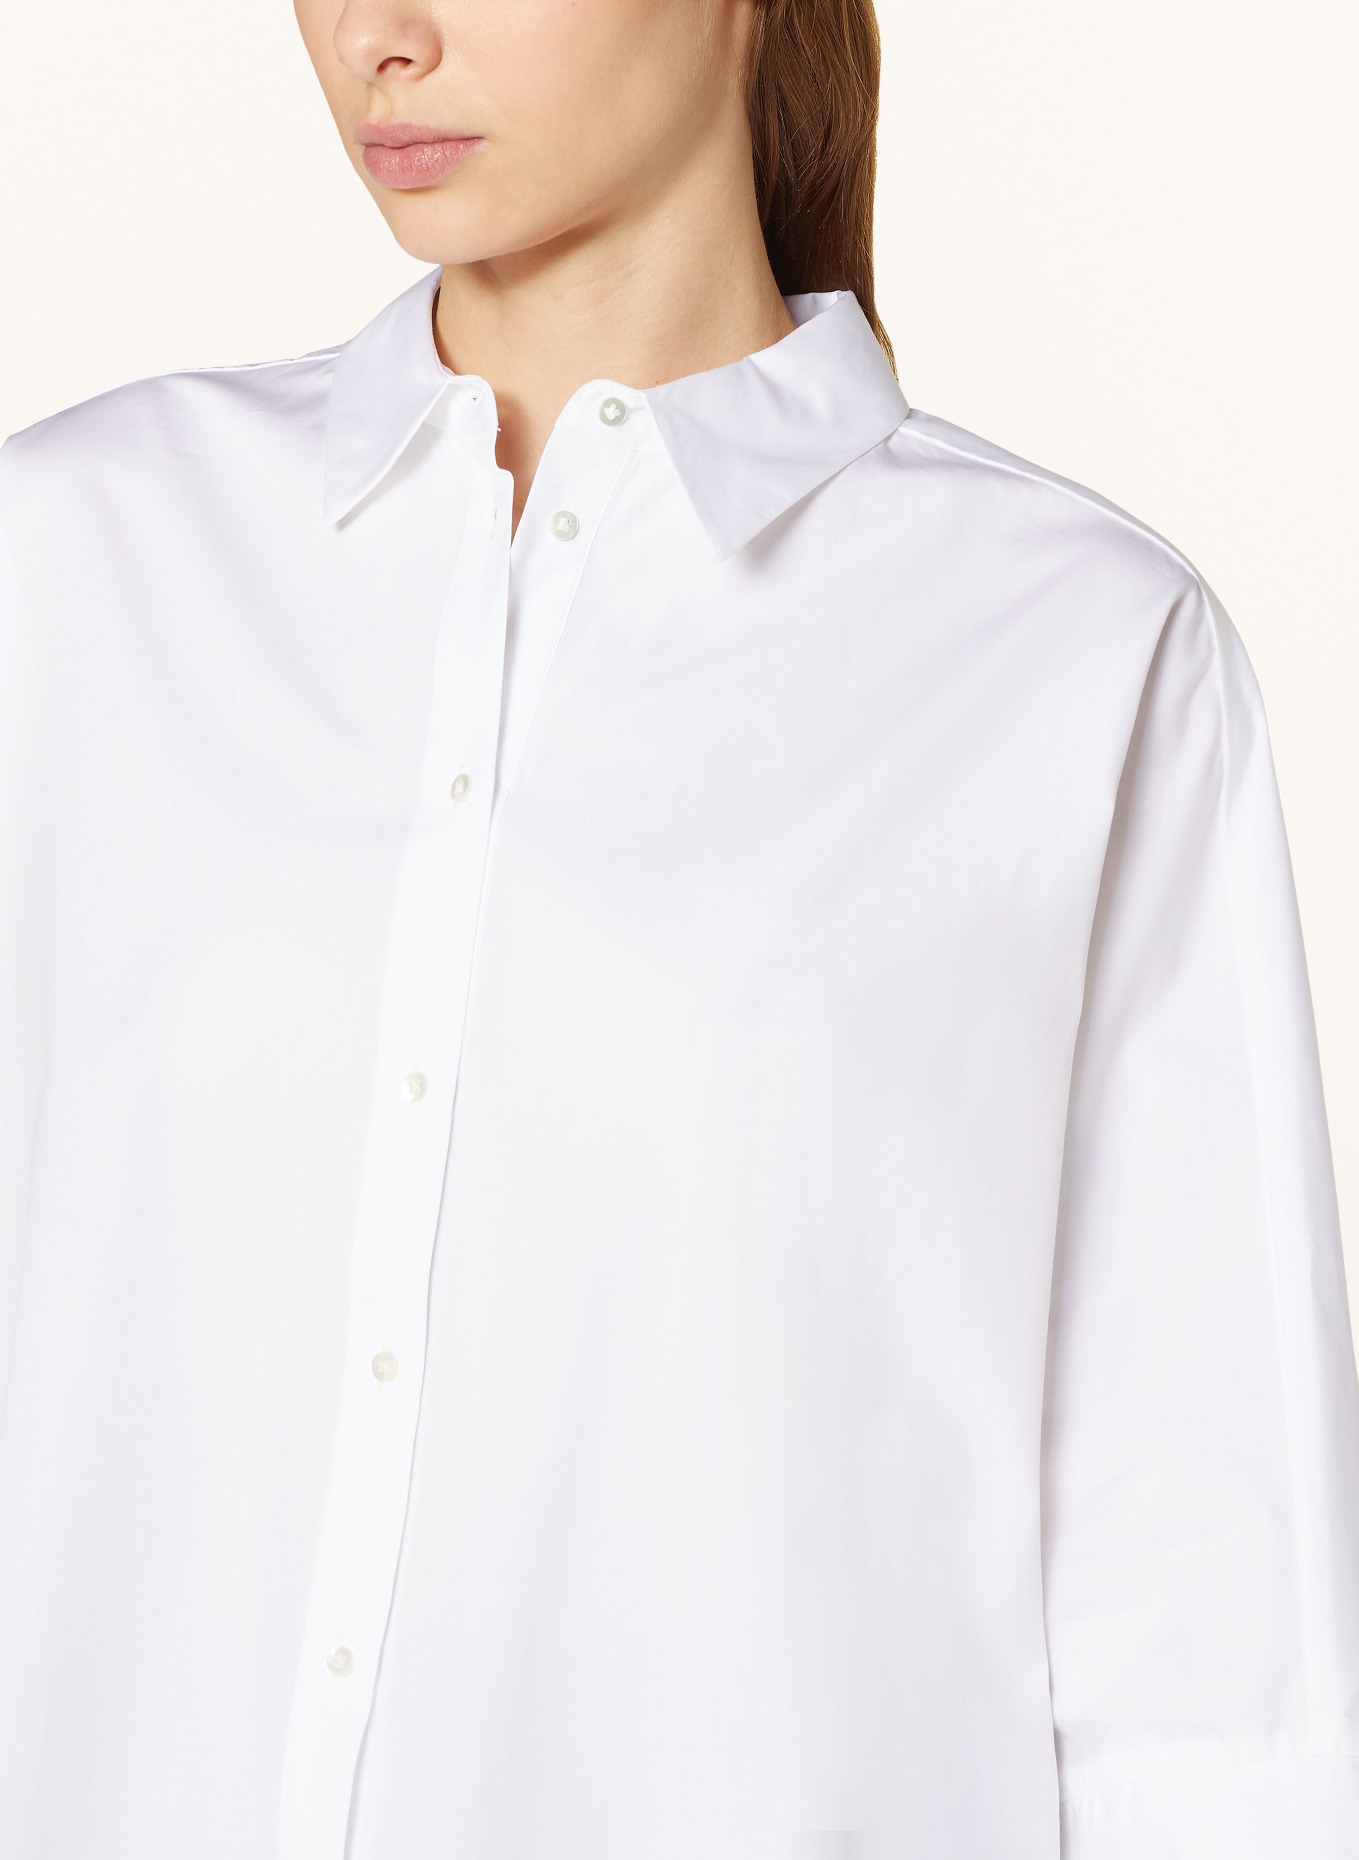 TONNO & PANNA Oversized shirt blouse with 3/4 sleeves, Color: WHITE (Image 4)